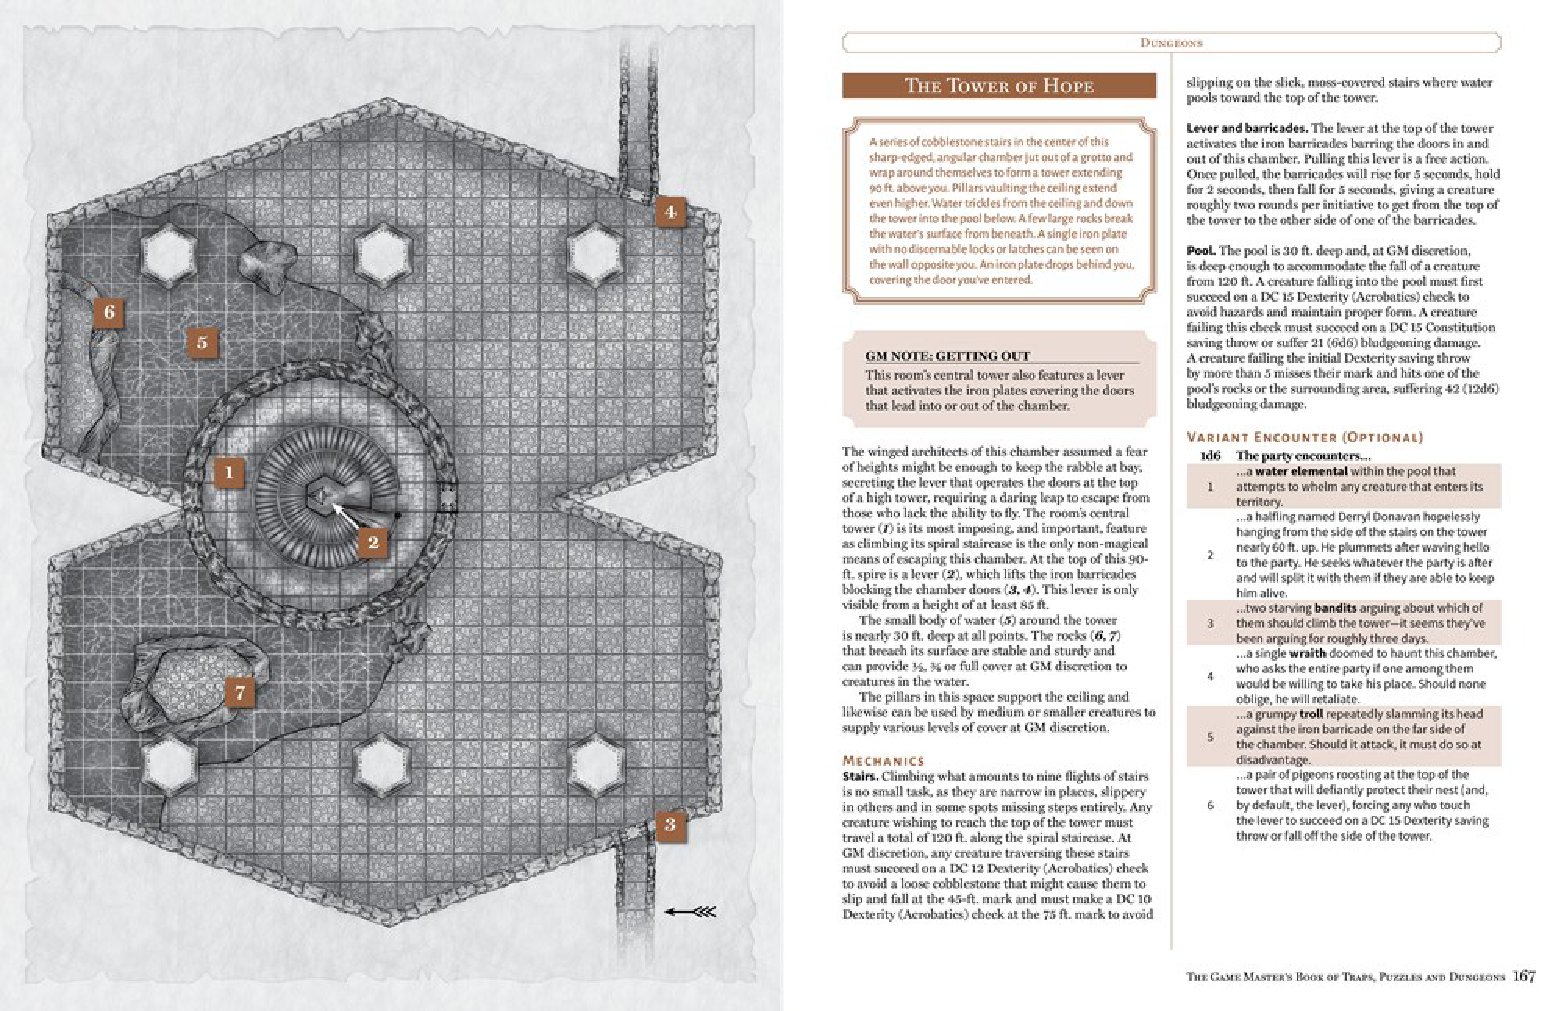 The Game Master's Book of Traps, Puzzles and Dungeons